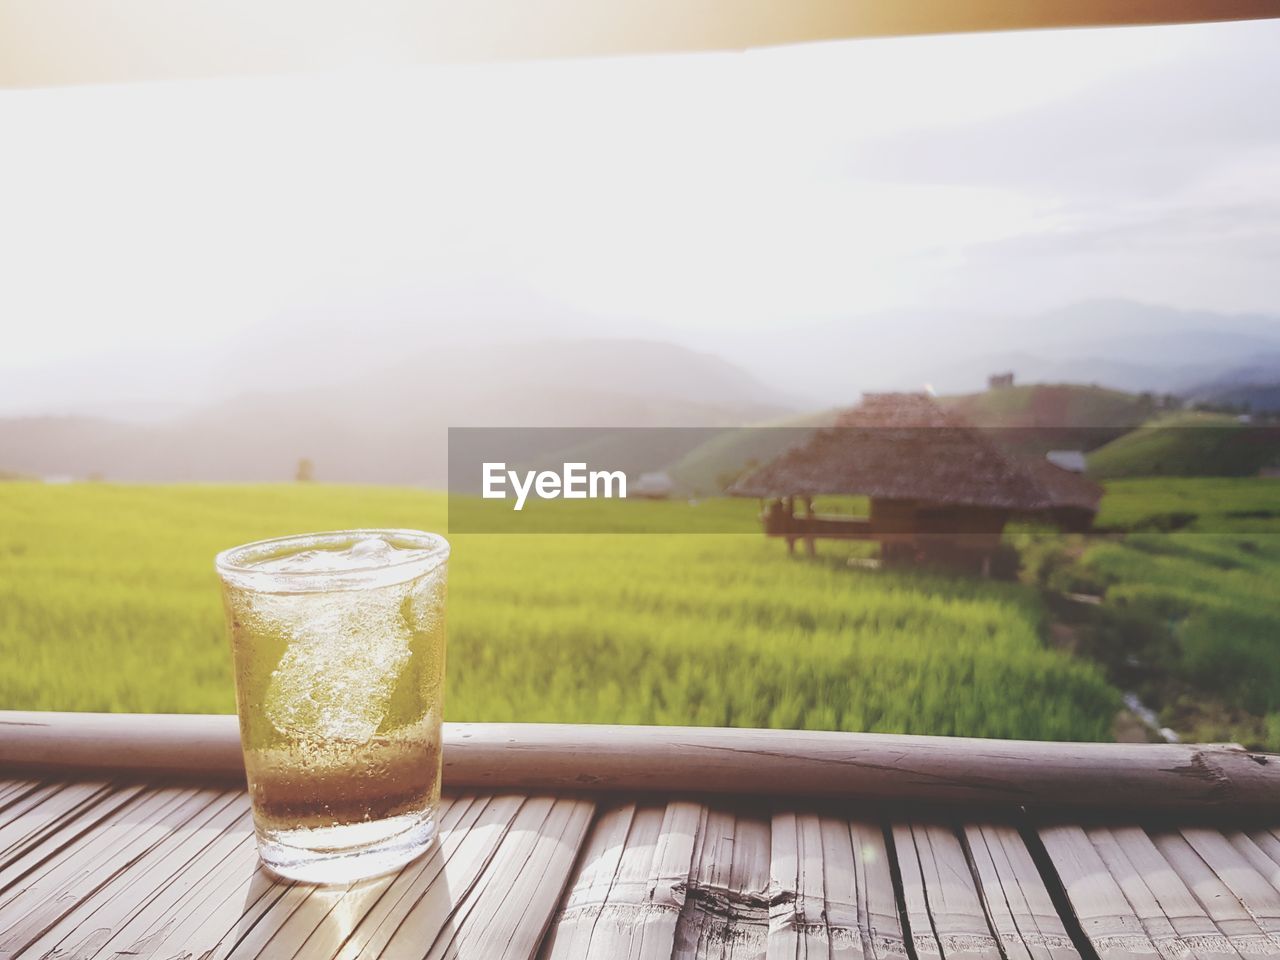 Drink in glass on wooden table against agricultural field